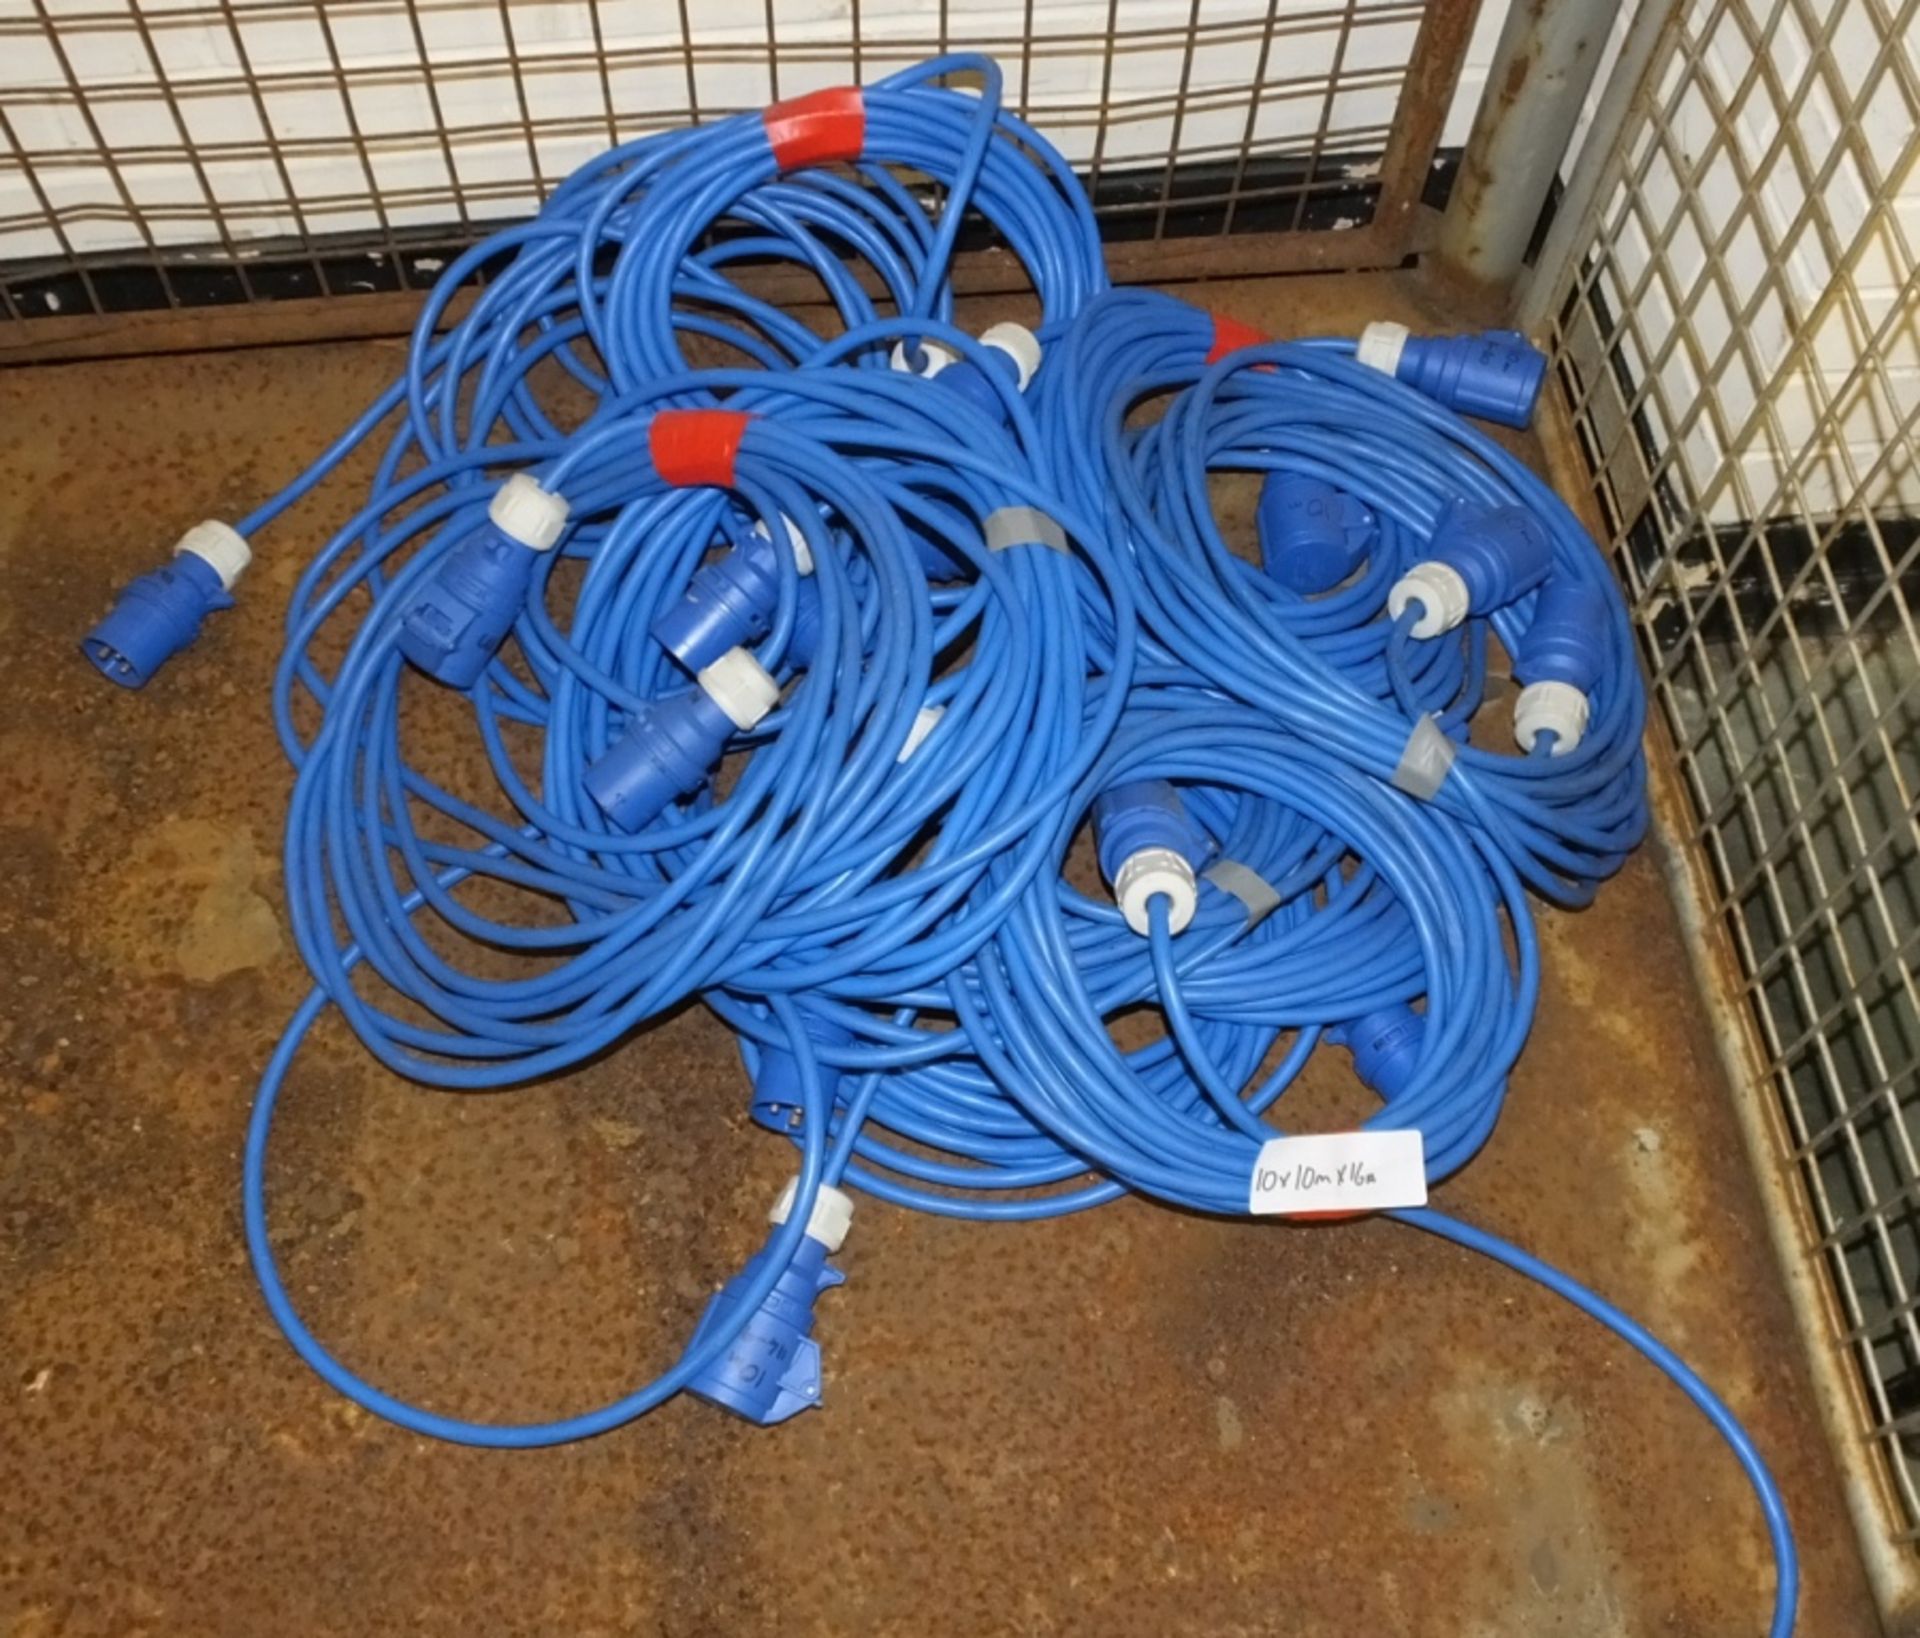 10x10m x 16A Tent Electrical Cables - Blue